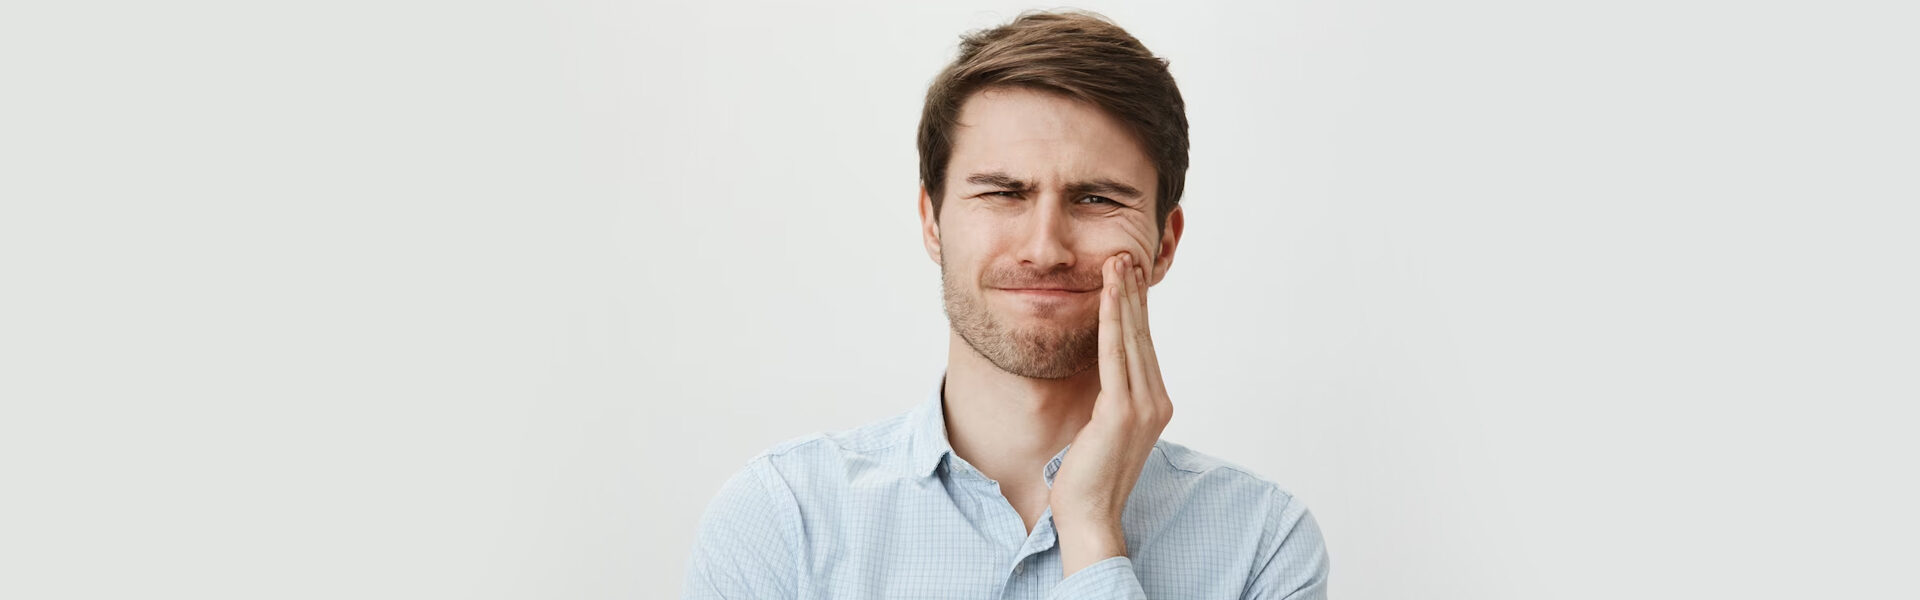 Why Should You Quickly Deal with Dental Emergencies?